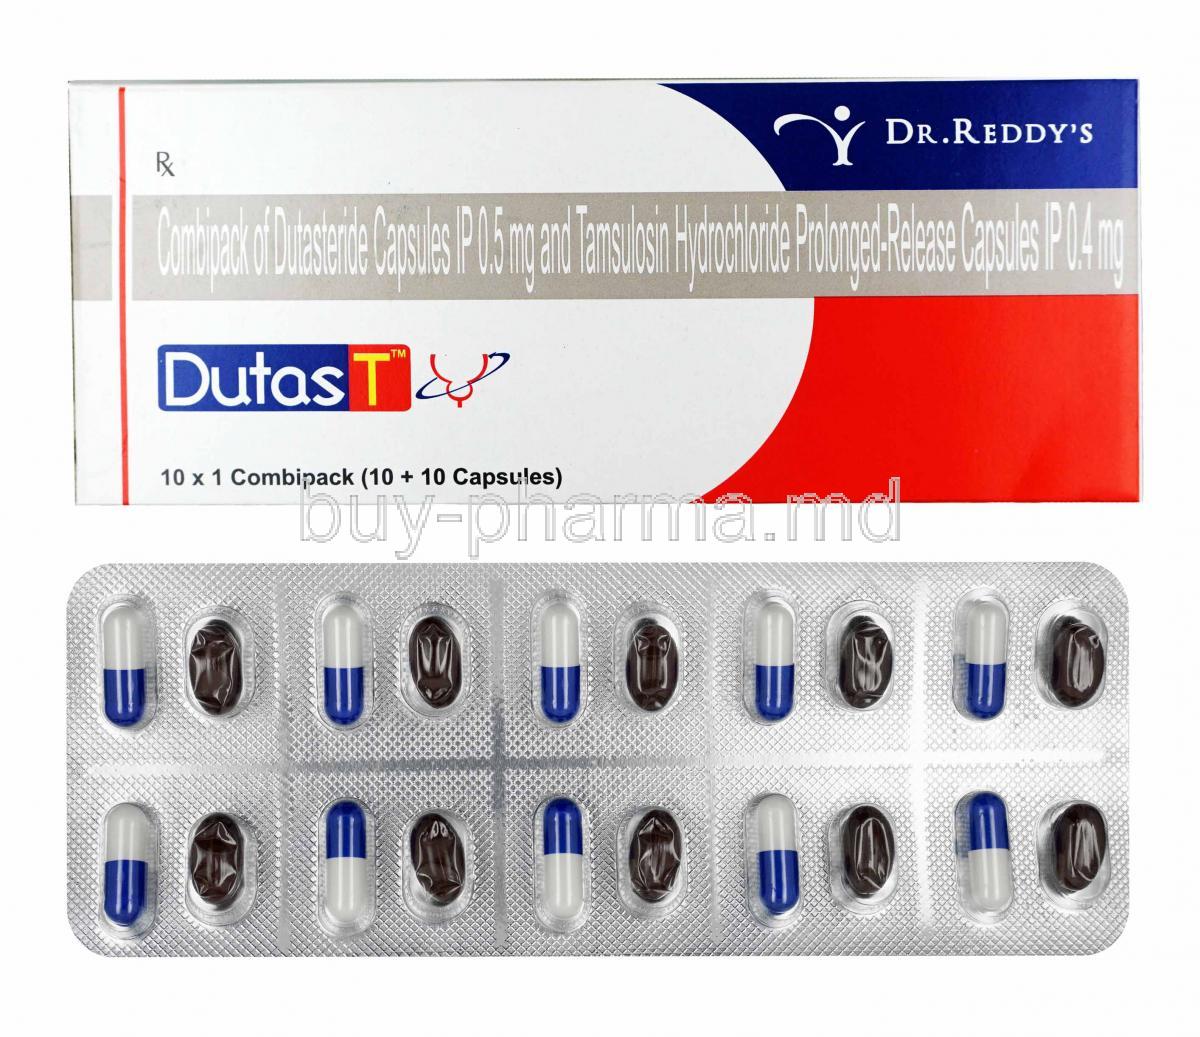 Dutas T Combipack, Tamsulosin and Dutasteride box and capsules